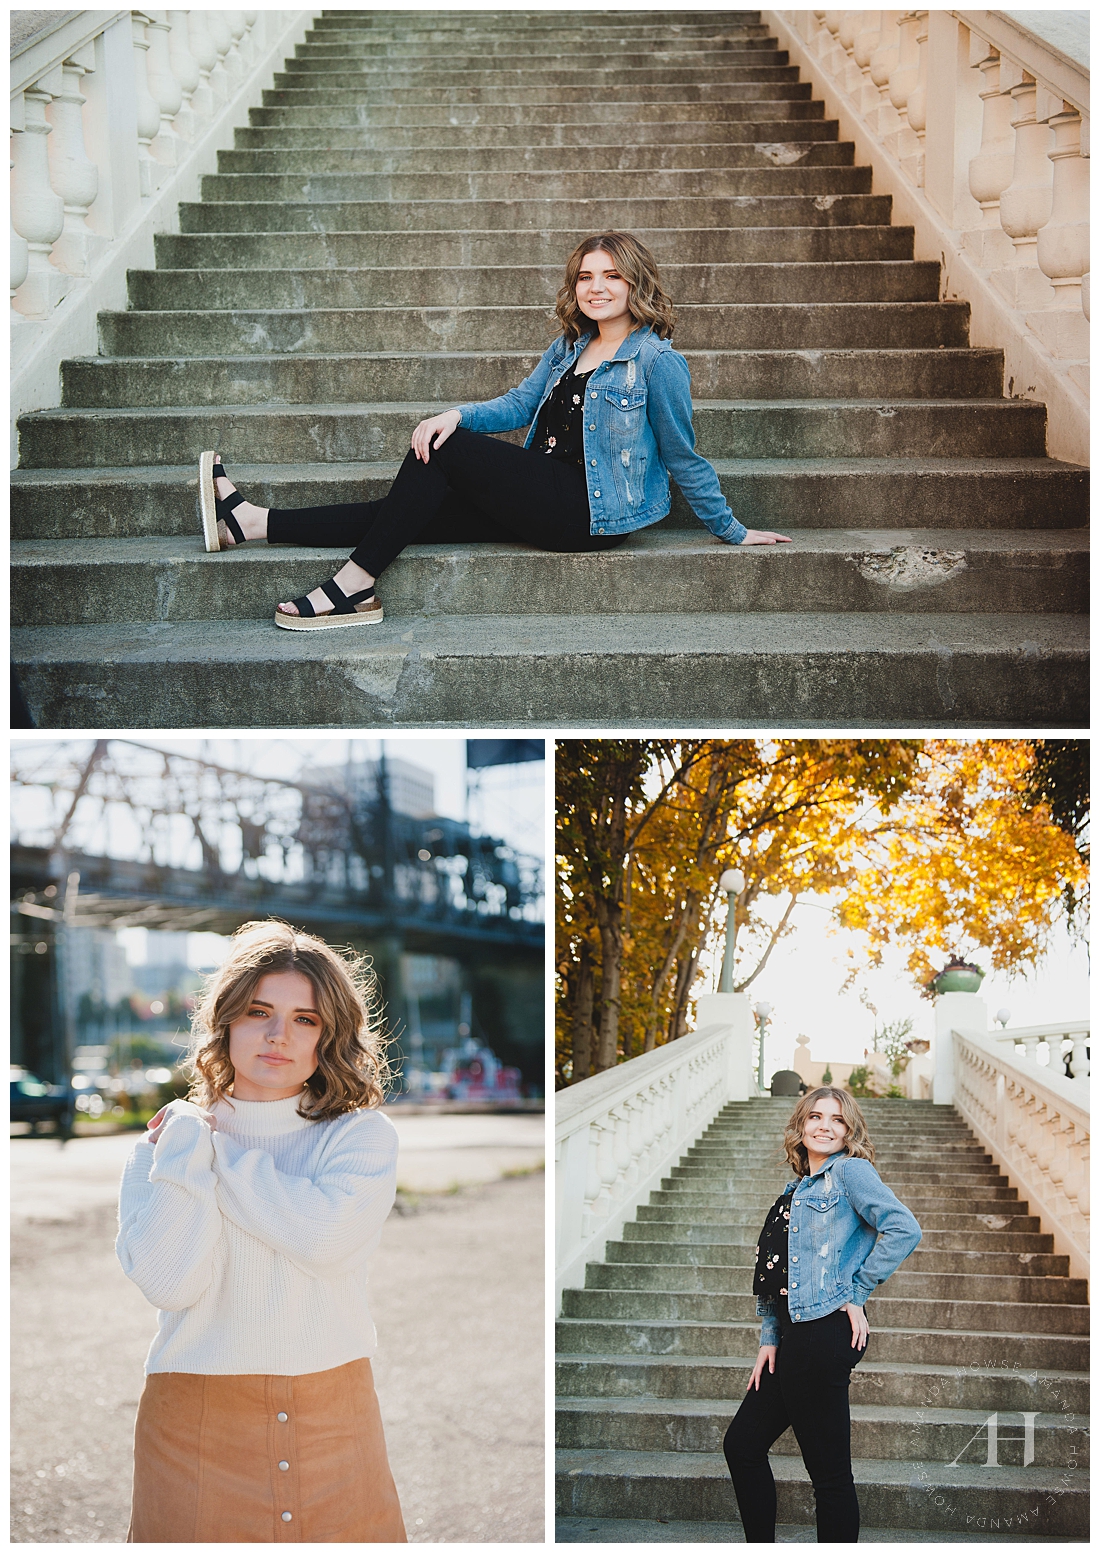 The Best Locations for Tacoma Senior Portraits in Fall | A Seasonal Guide for Senior Portraits | Photographed by Tacoma Senior Photographer Amanda Howse